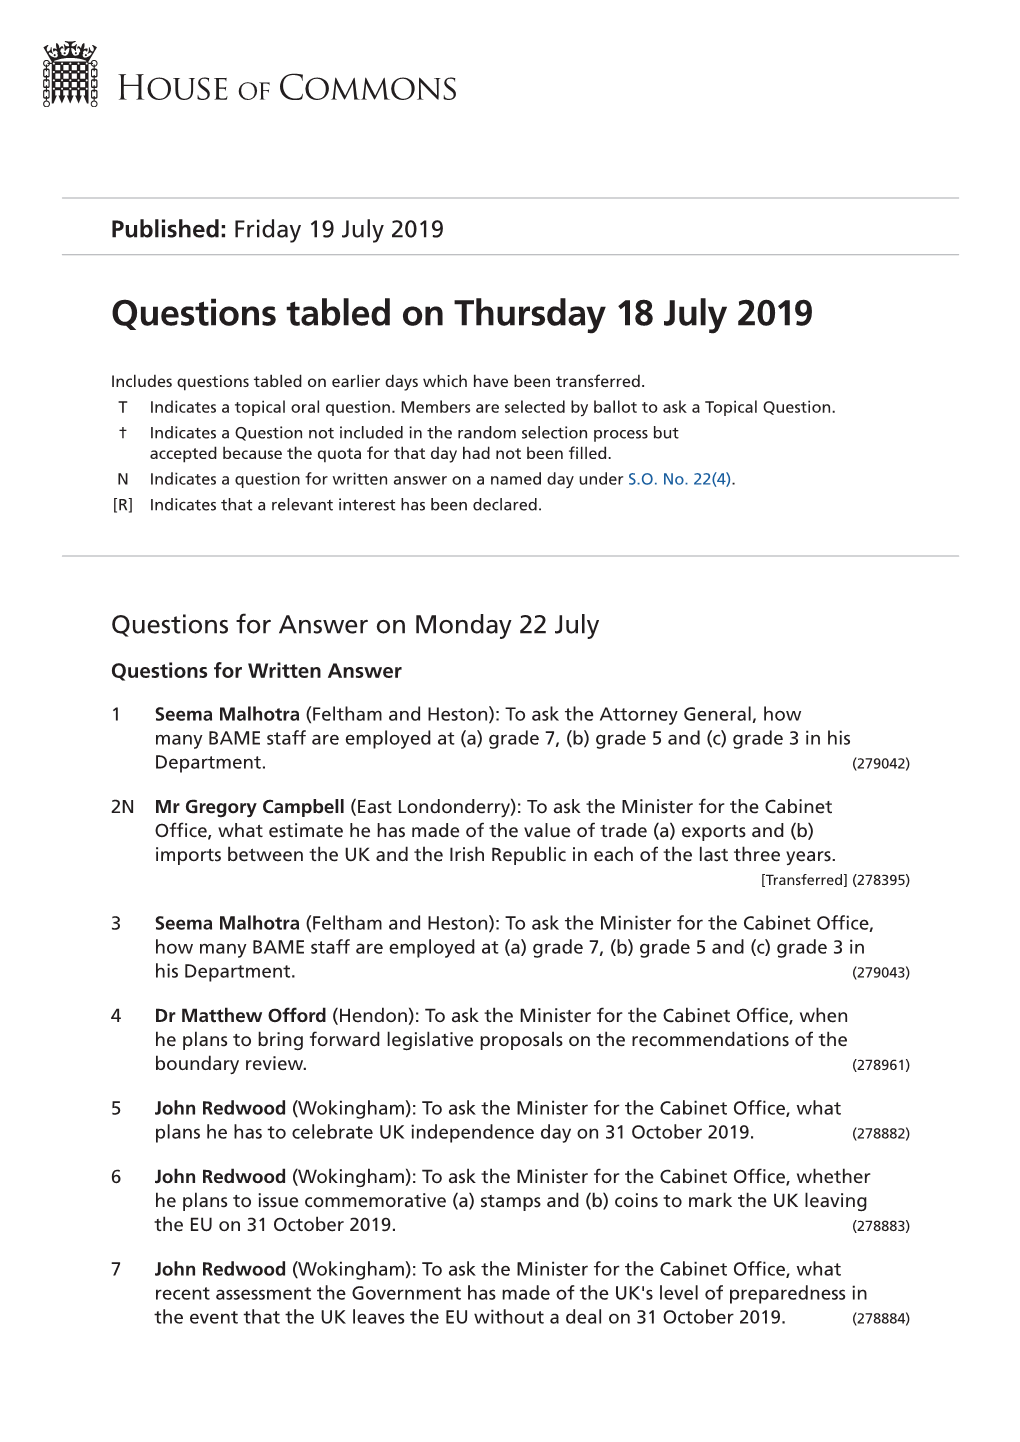 Questions Tabled on Thu 18 Jul 2019